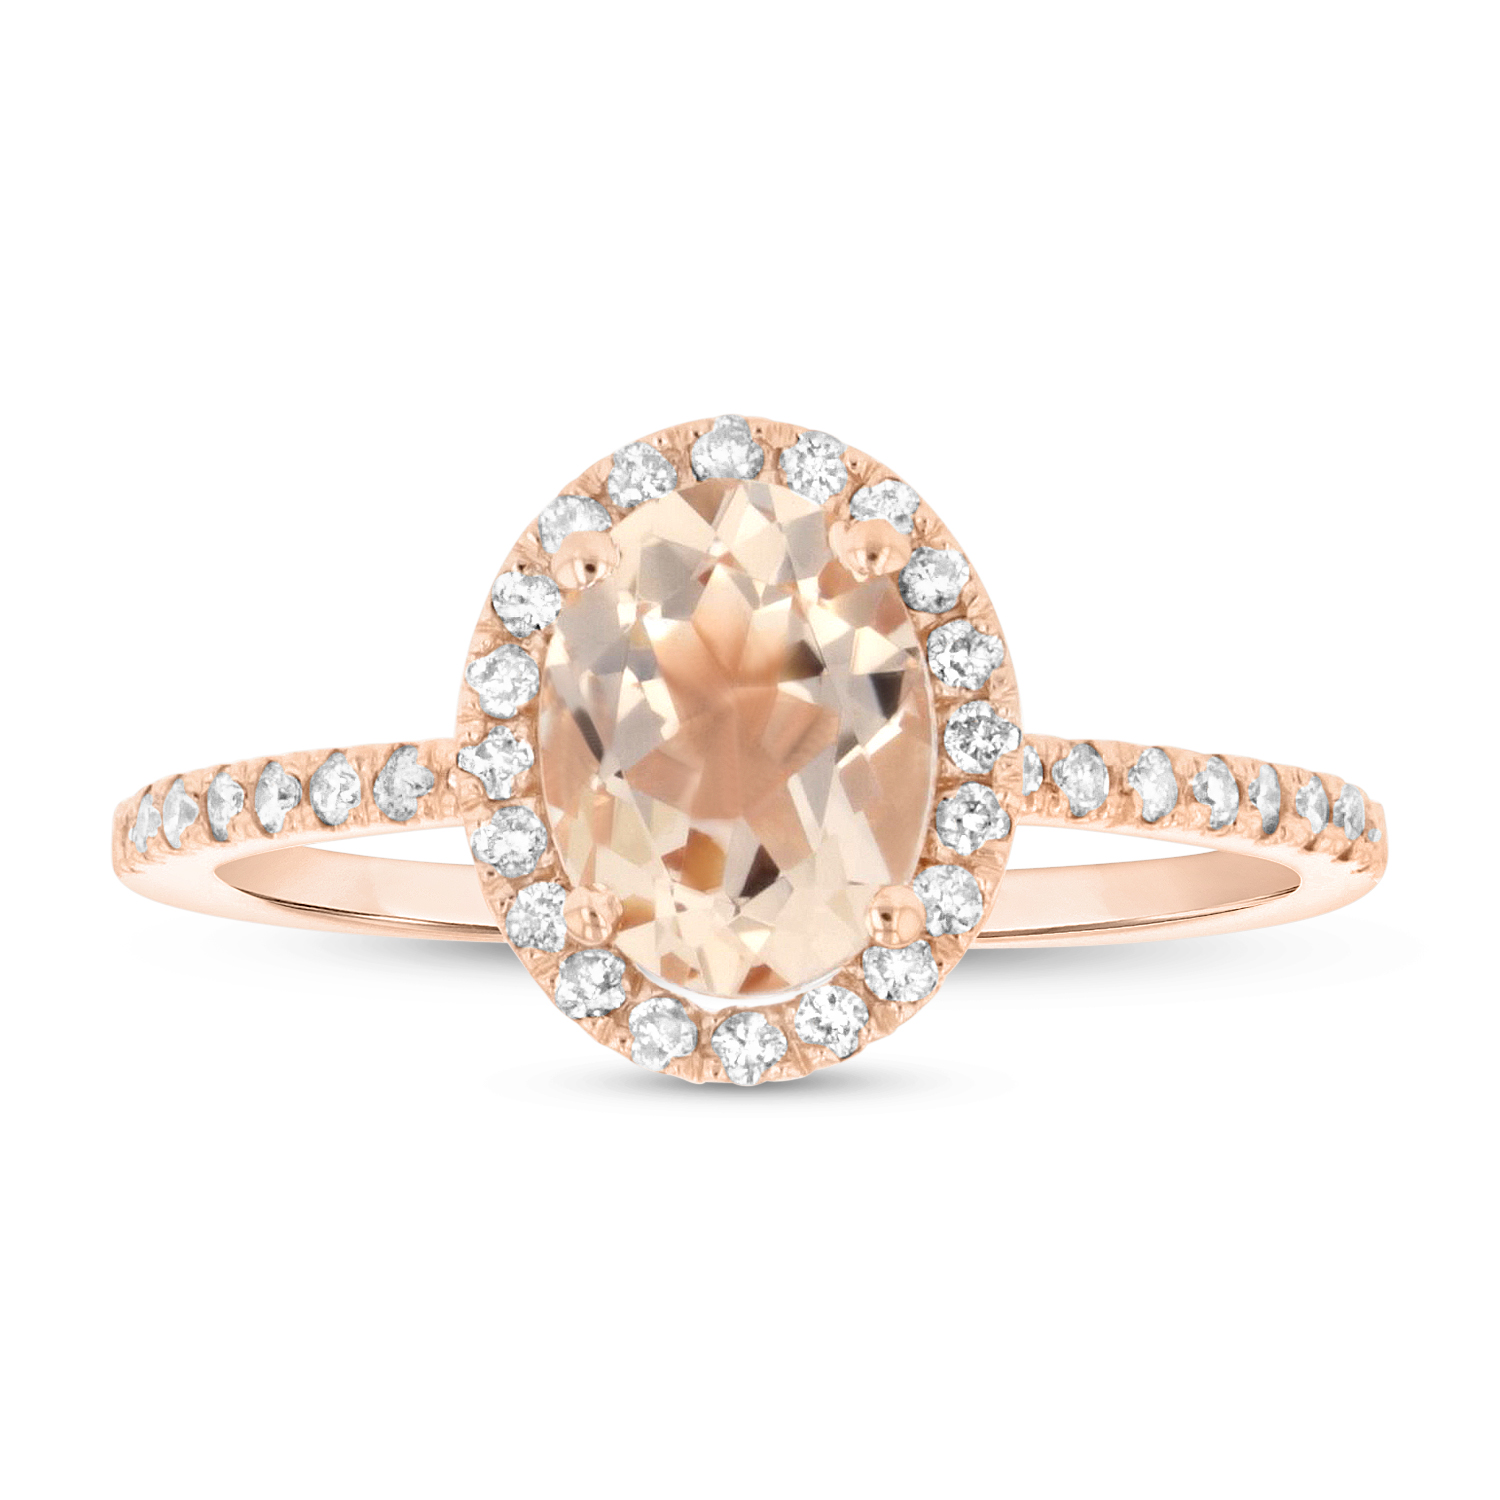 View 8X6 mm Oval Morganite and Diamond Ring in 14k Rose Gold